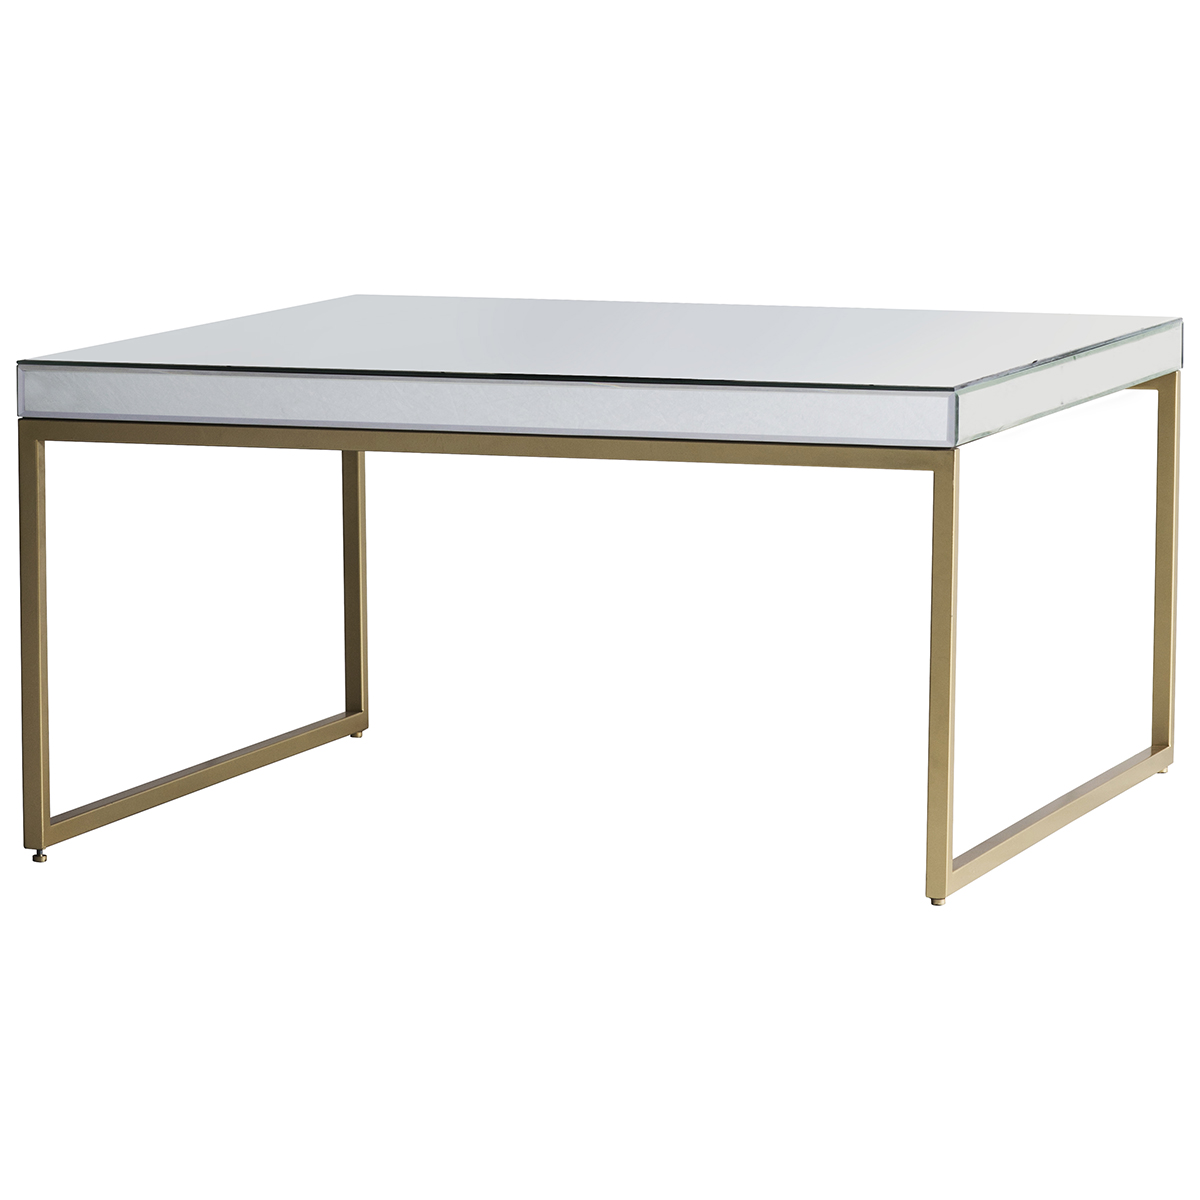 Gallery Direct Pippard Coffee Table Champagne